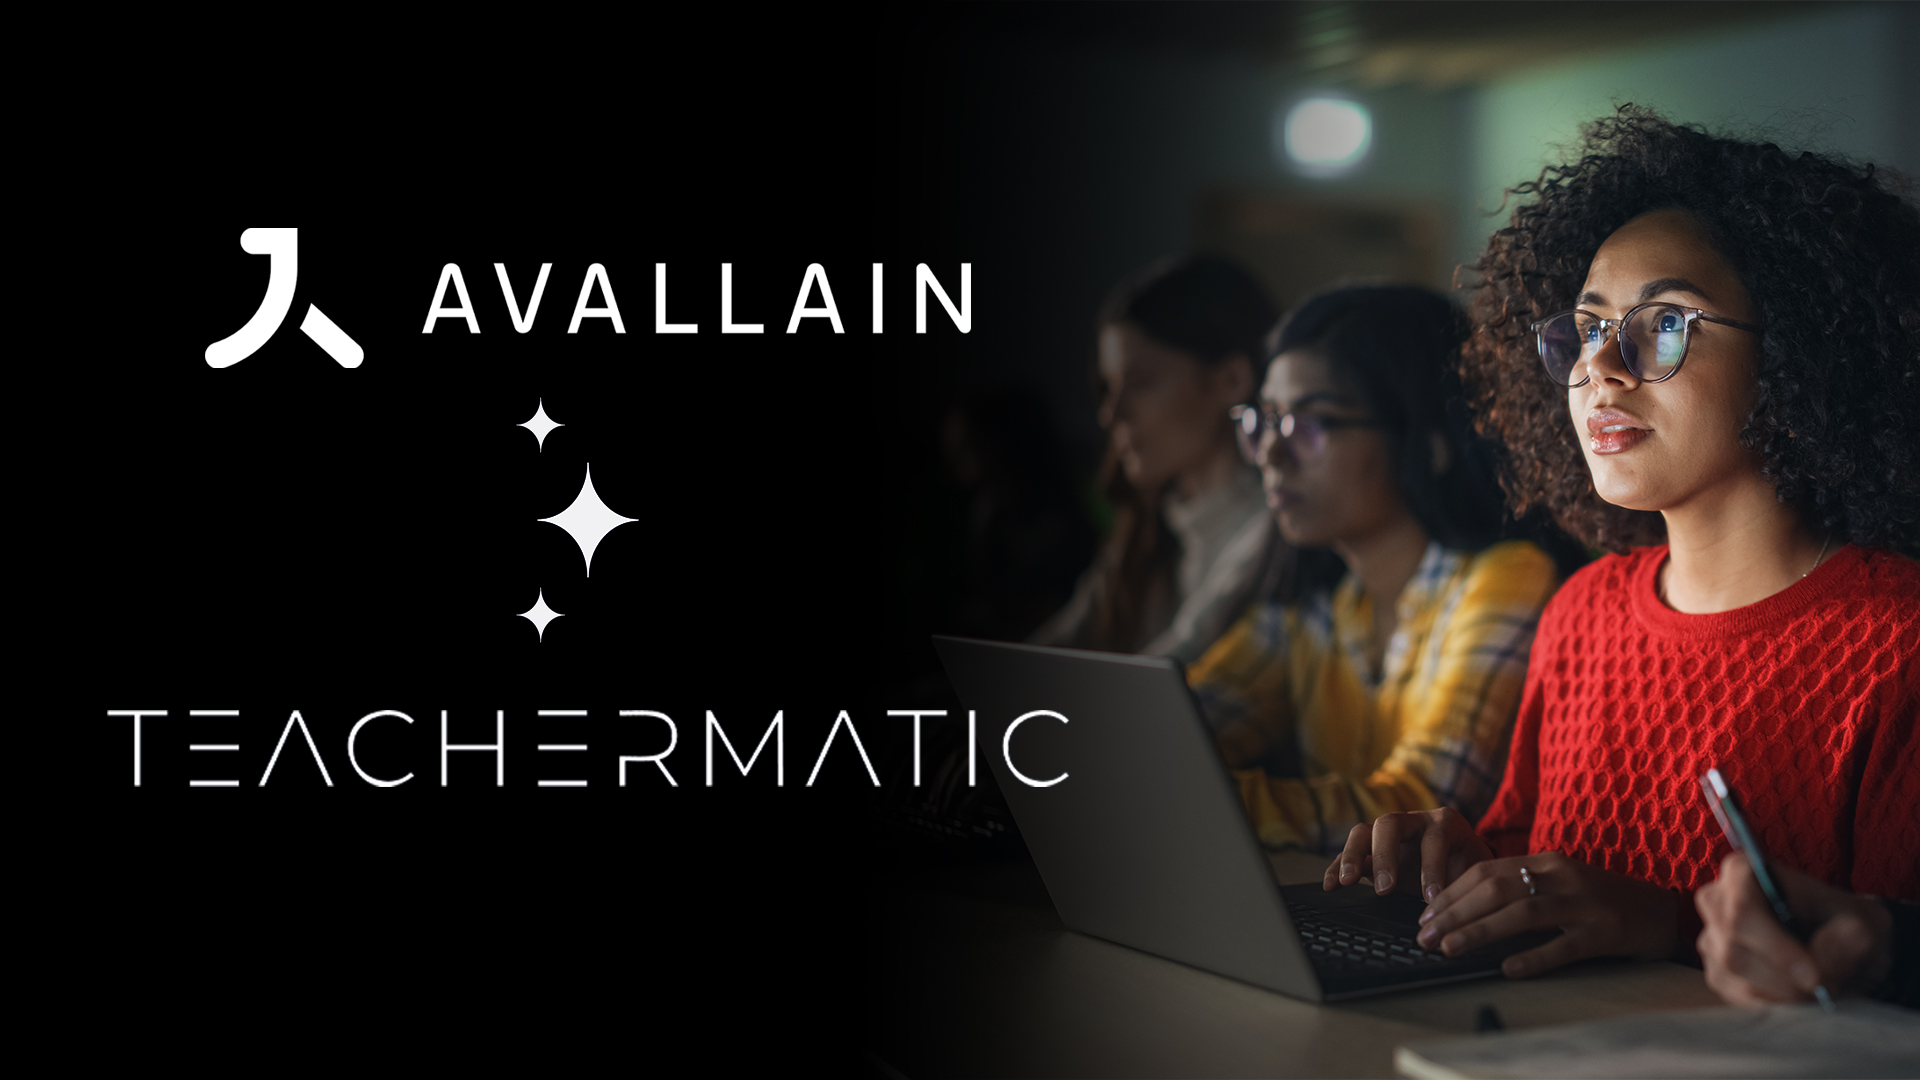 Young student watches Avallain and TeacherMatic logos connected through AI spark icons